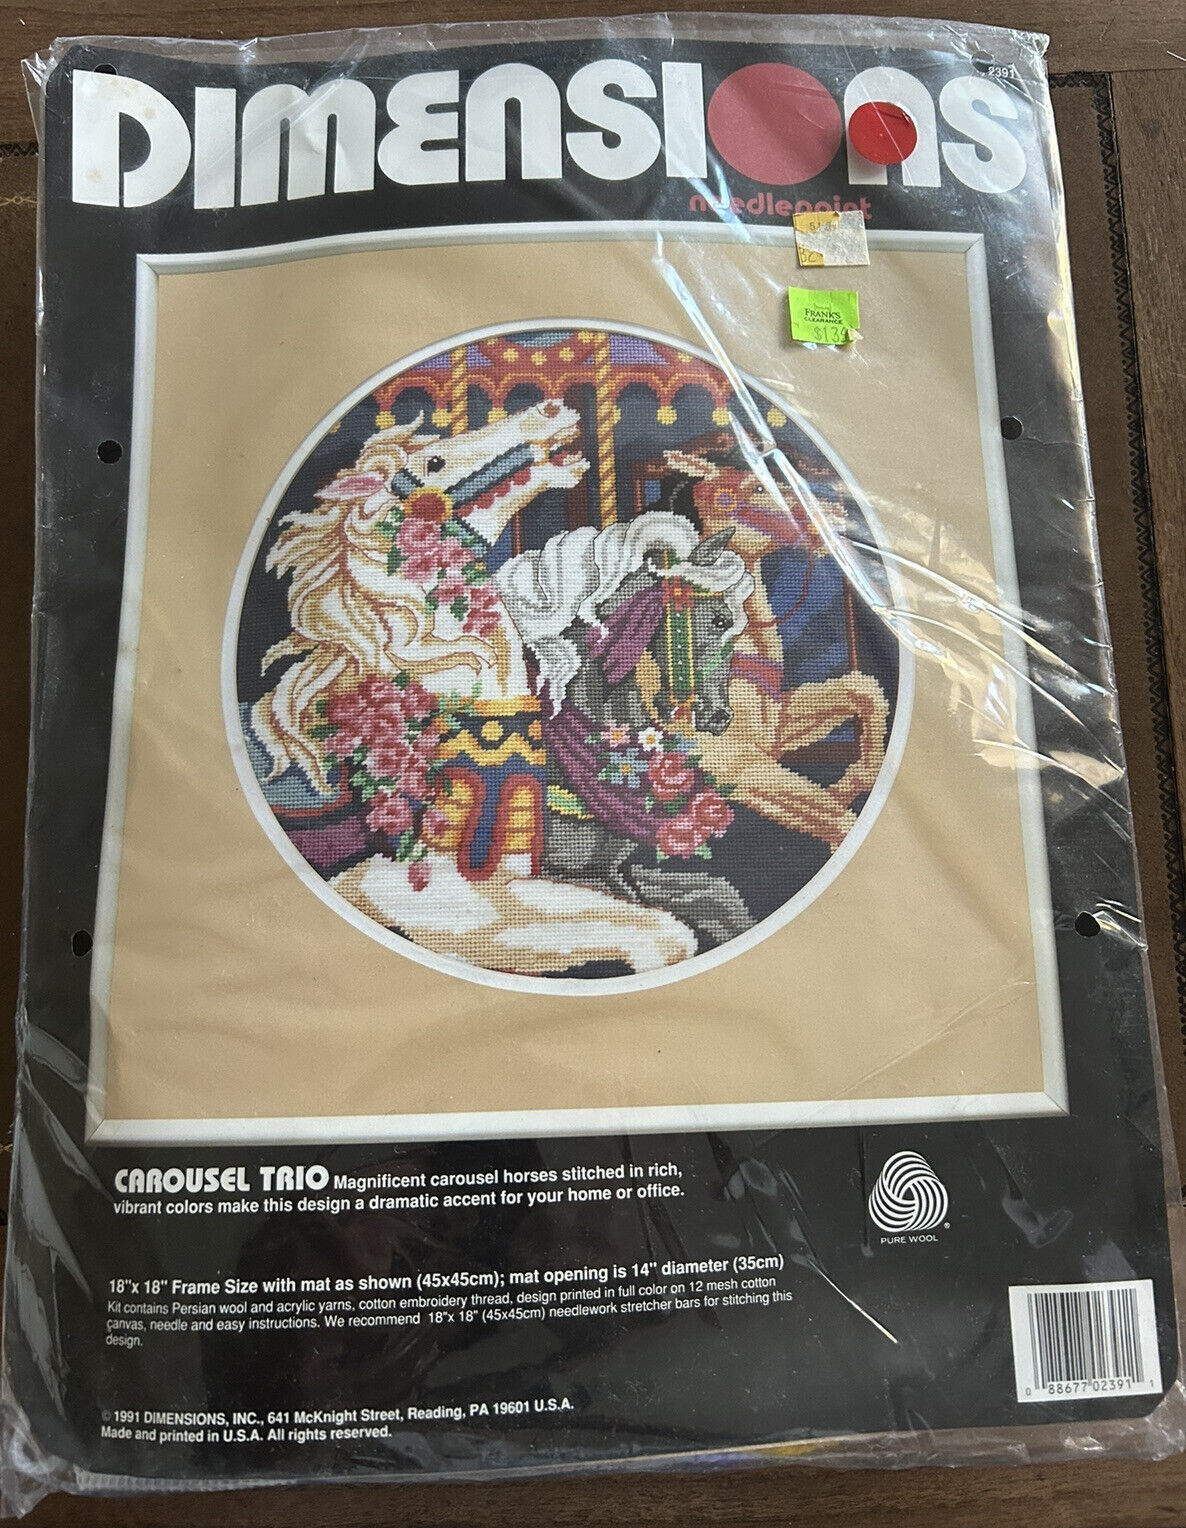 Vintage Dimensions Carousel Trio 2391 Needlepoint 14” Sealed Package 1991 - $15.83